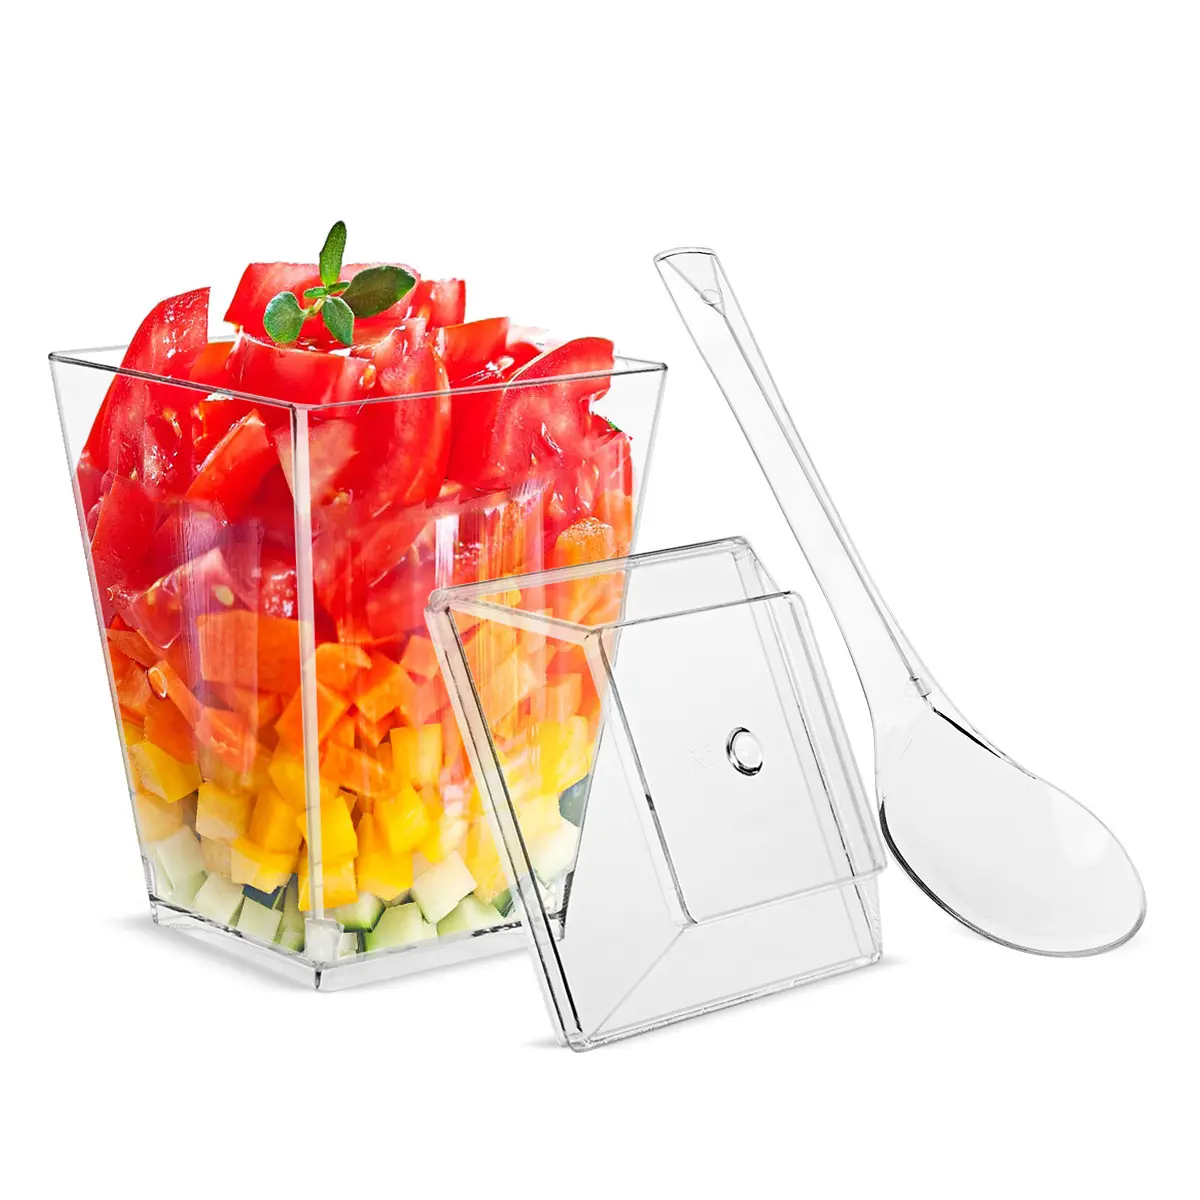 PS Plastic Clear 5oz 150ml Square Dessert Cup Covered with Spoon Mousse Cup Pudding Disposable Food Dessert Cup